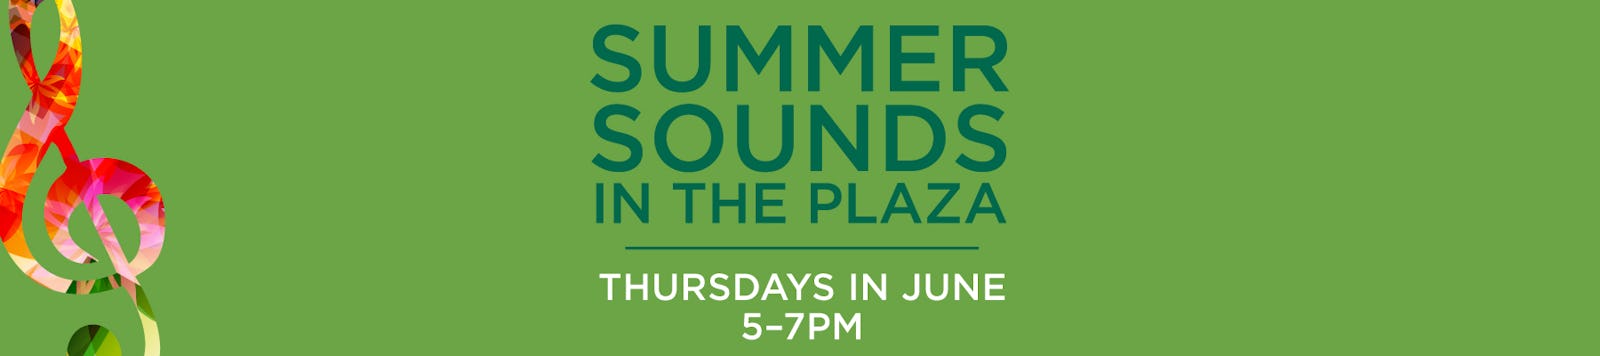 Summers Sounds in the Plaza